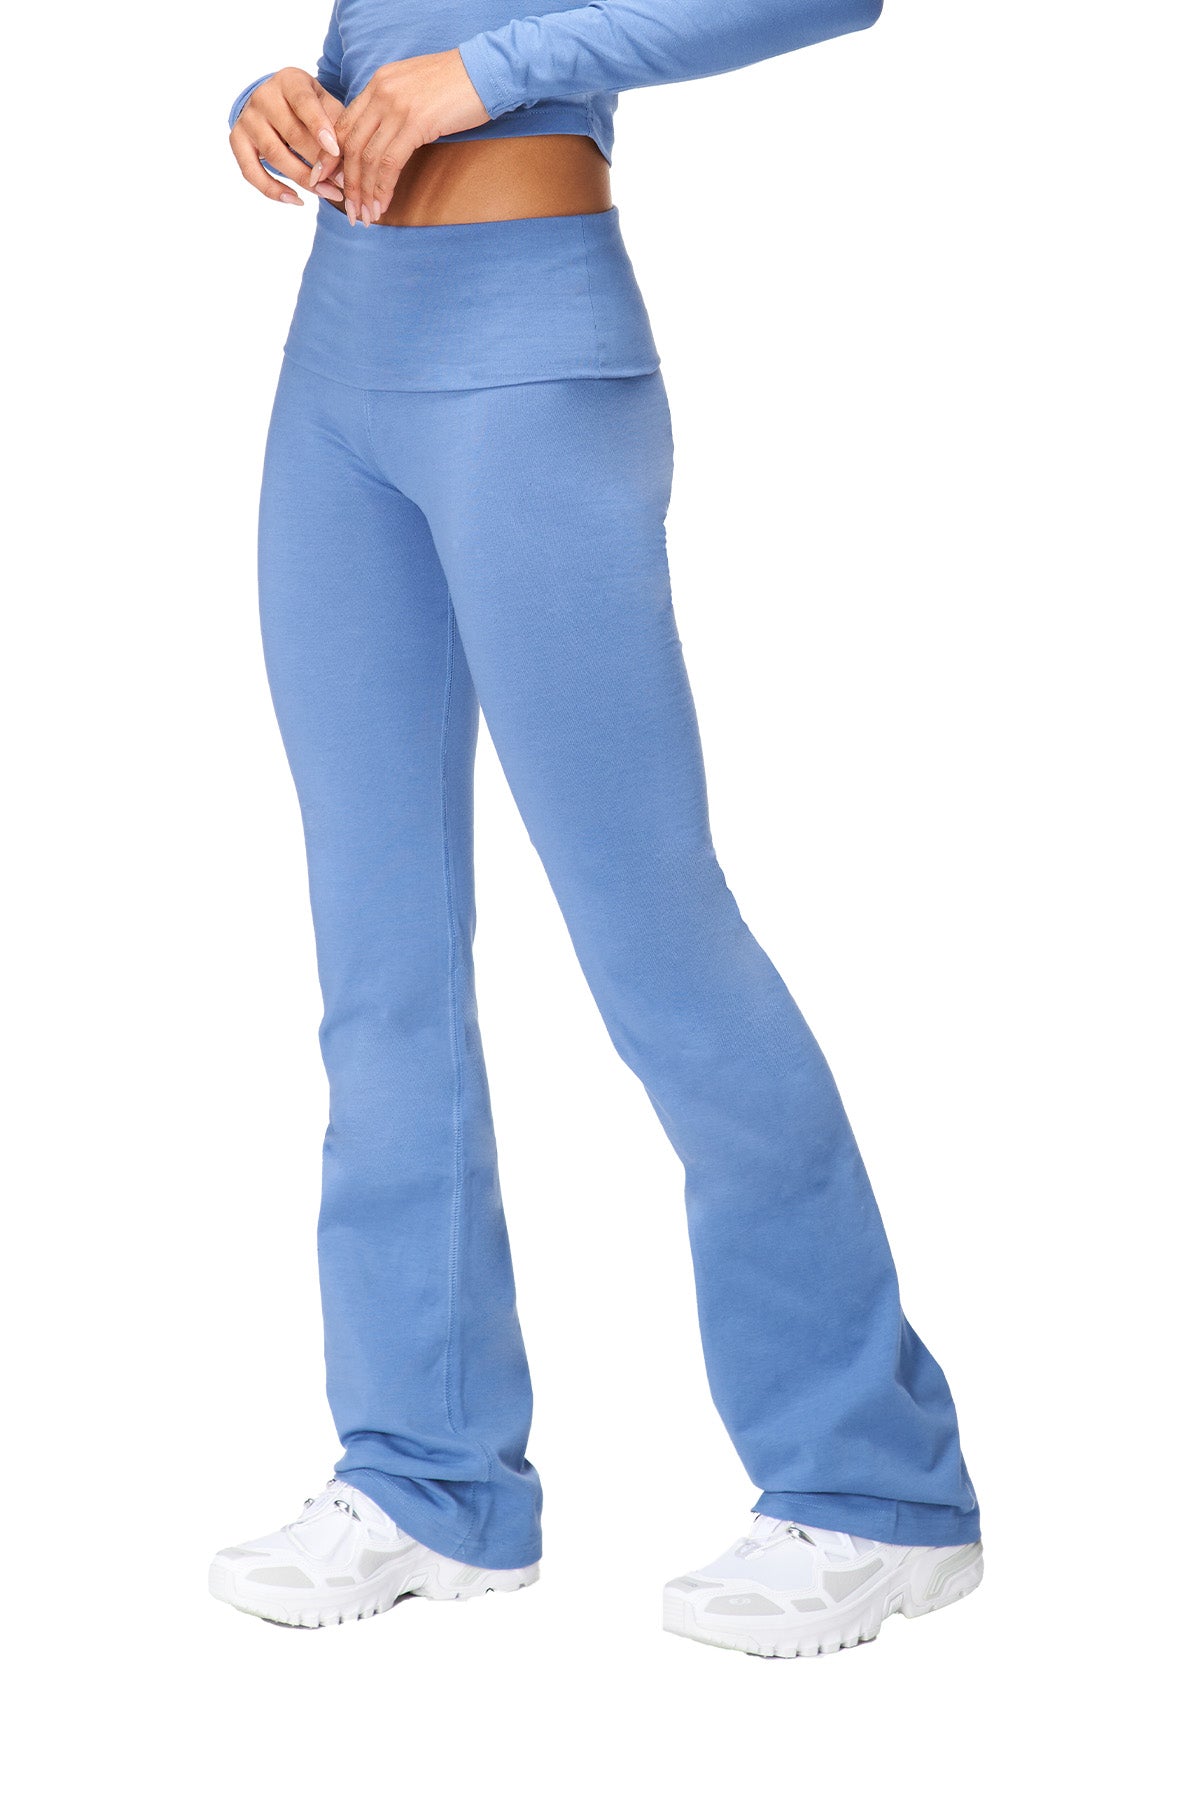 Tally - Flared Turnover Pant in